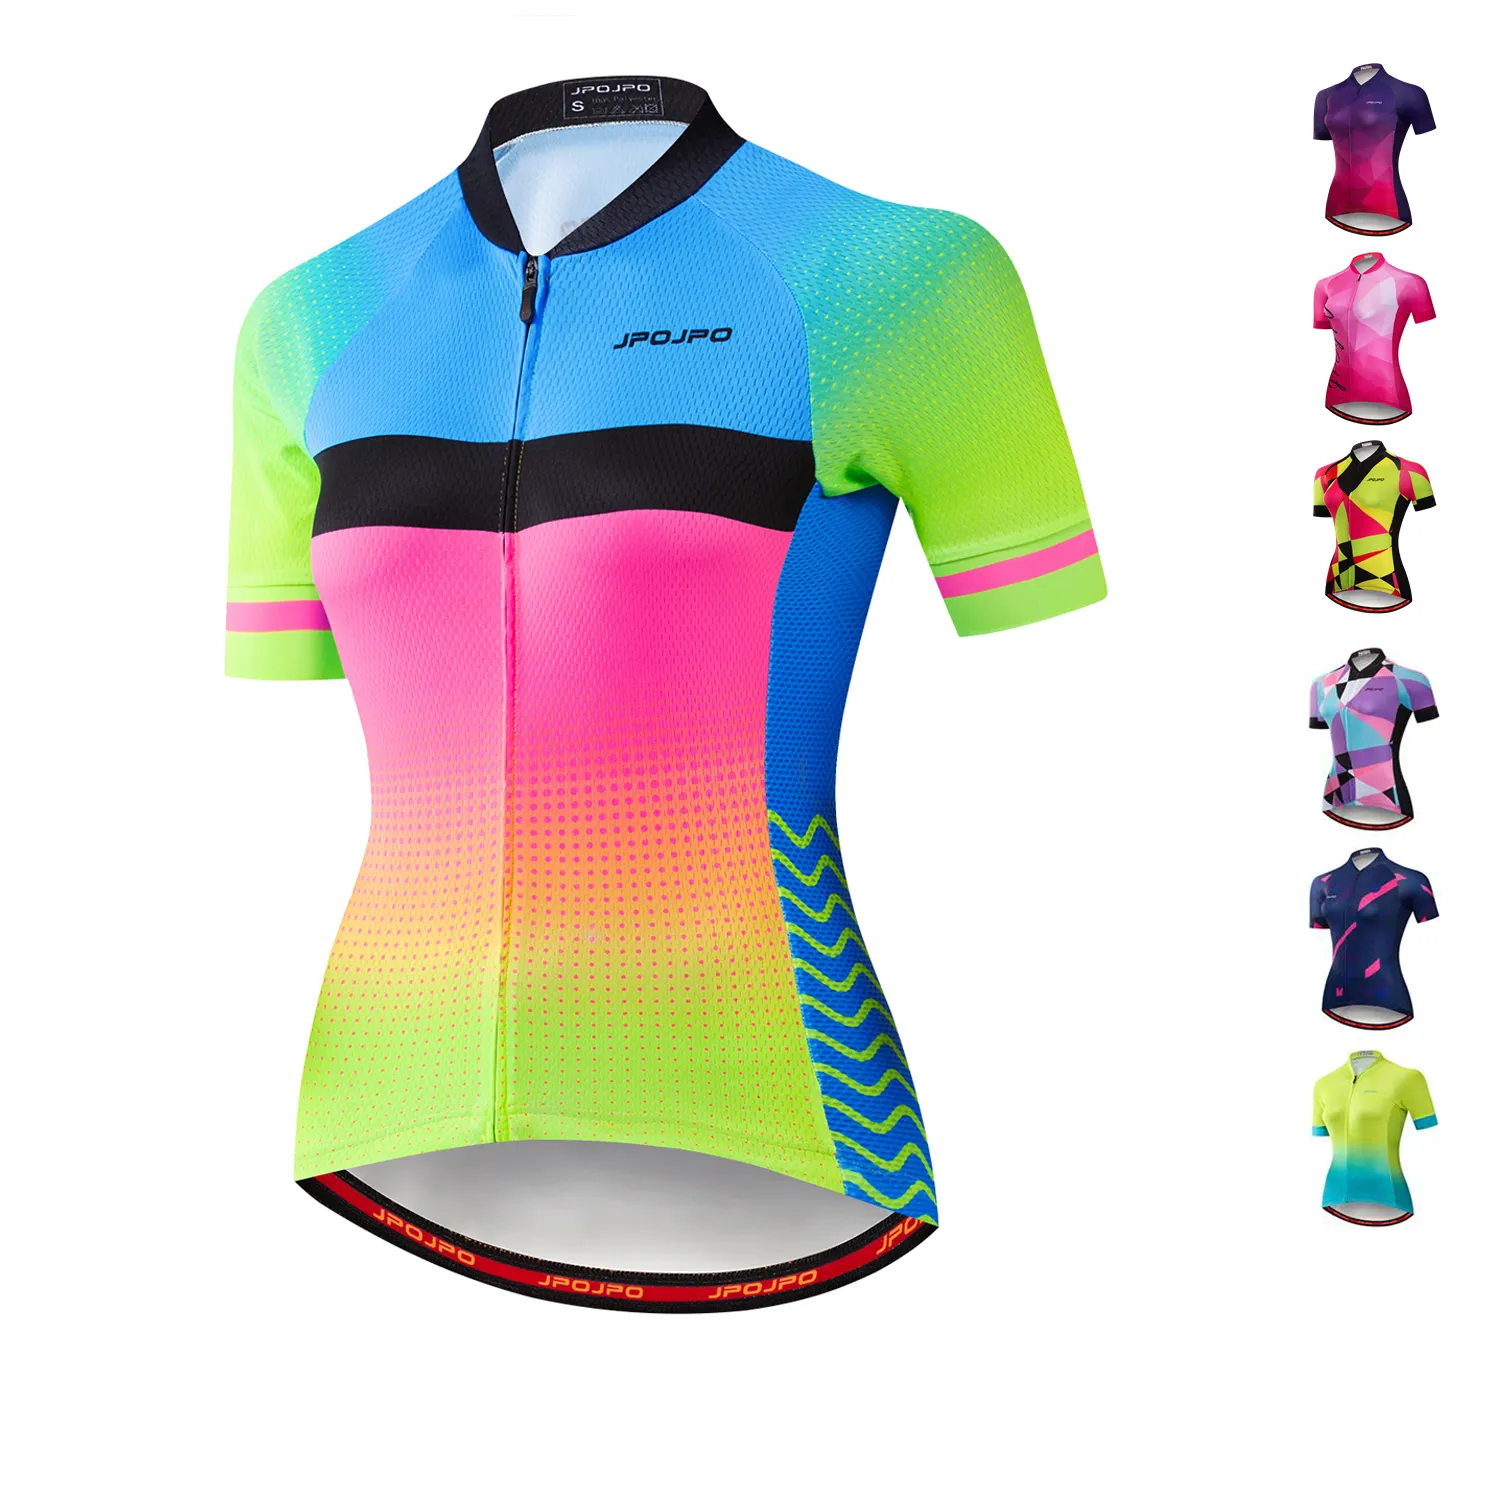 JPOJPO Women's Cycling Jersey Short Sleeve Jacket Cycling Shirt Quick Dry Breathable Mountain Clothing Bike Top 